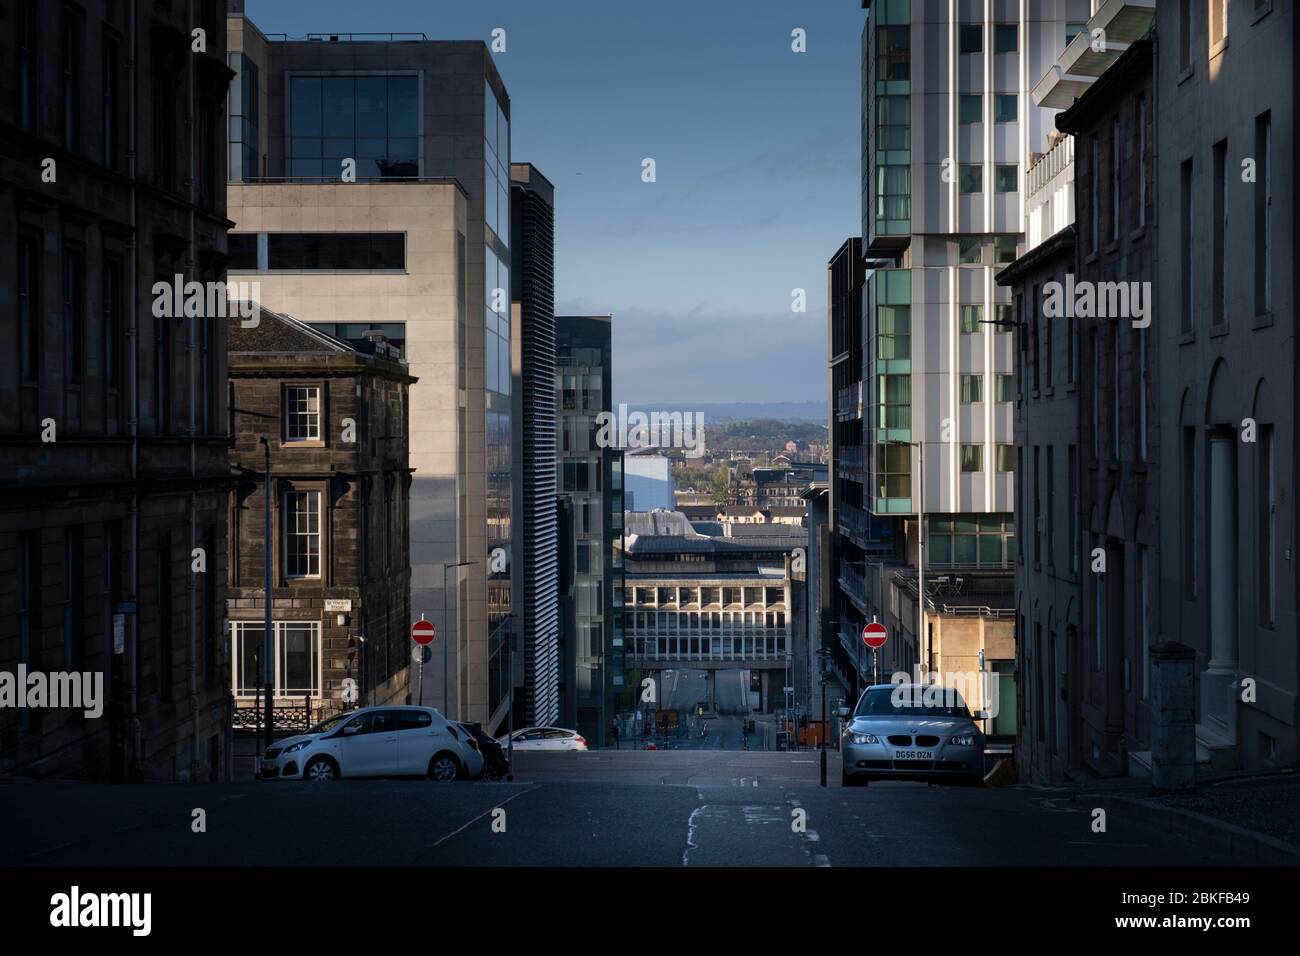 View looking down Douglas street in Glasgow during the Covid-19 lockdown. Stock Photo